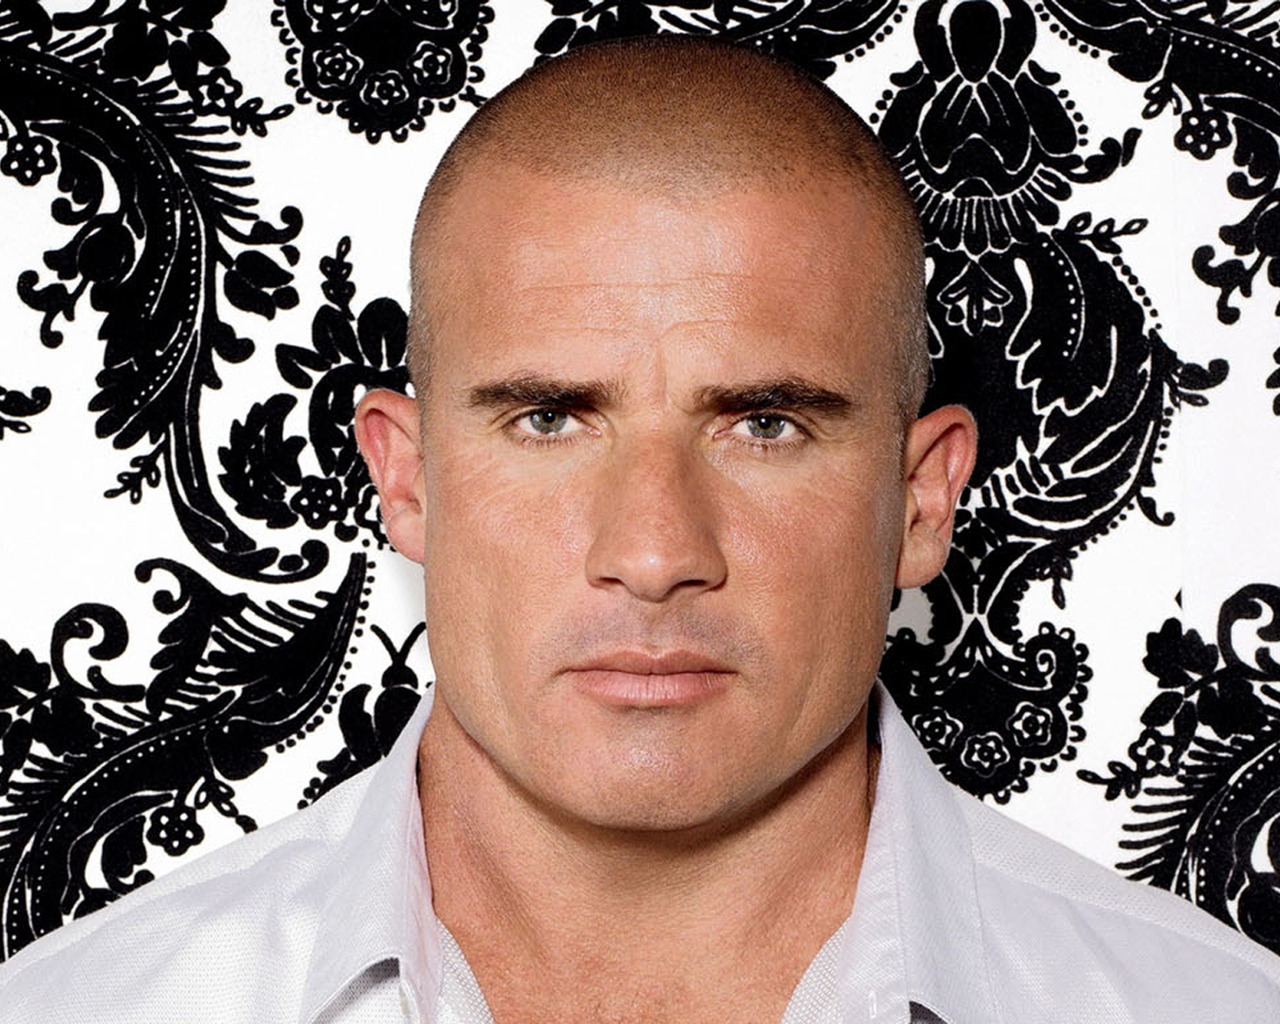 Dominic Purcell for 1280 x 1024 resolution